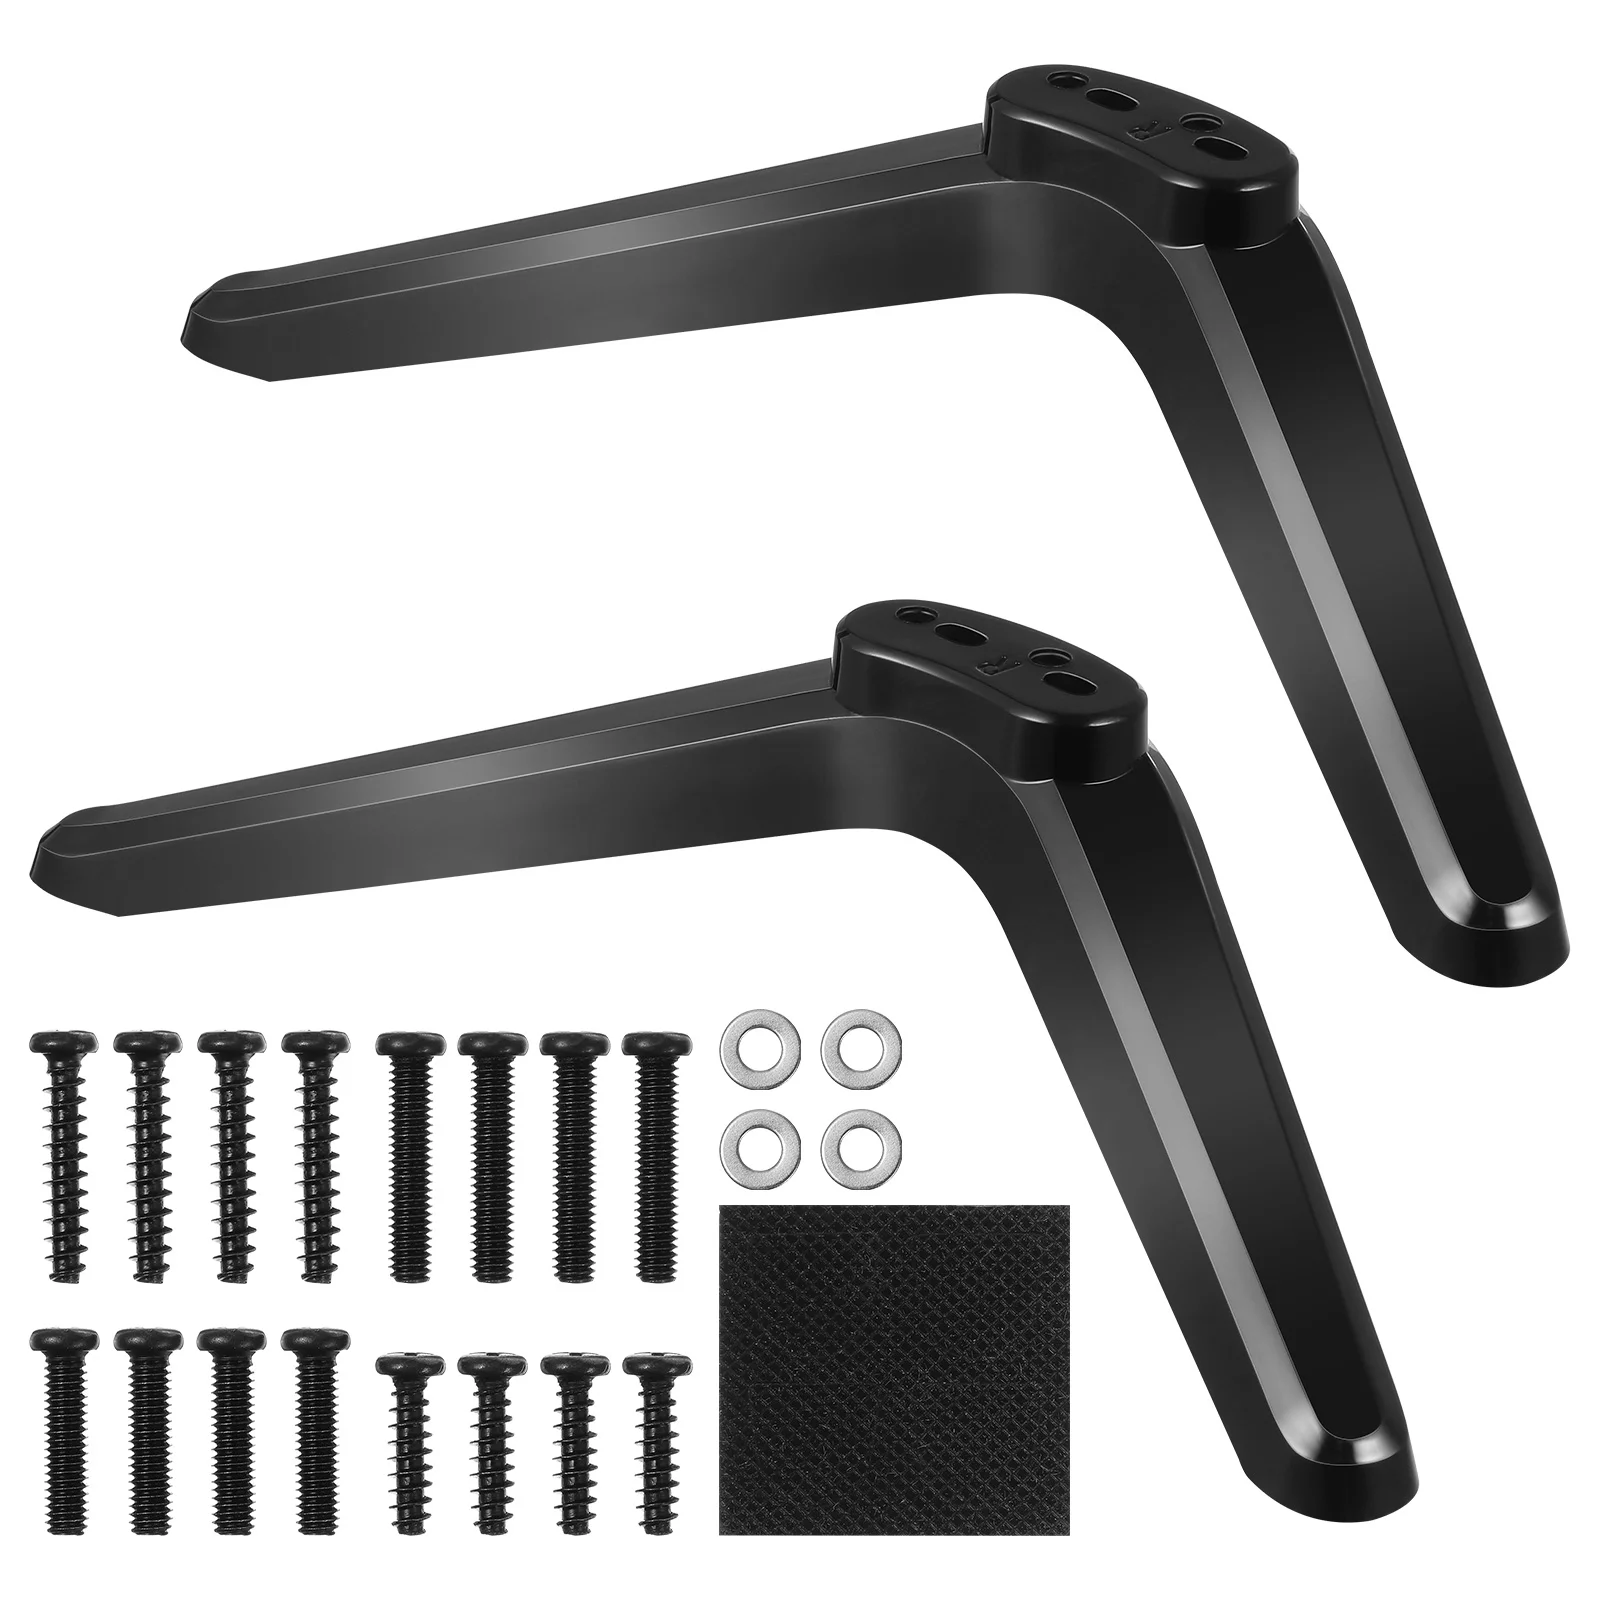 

2 Pcs Mount Television Stand Screw Holder Mounts Bracket Desk Plastic With Stands Monitor support